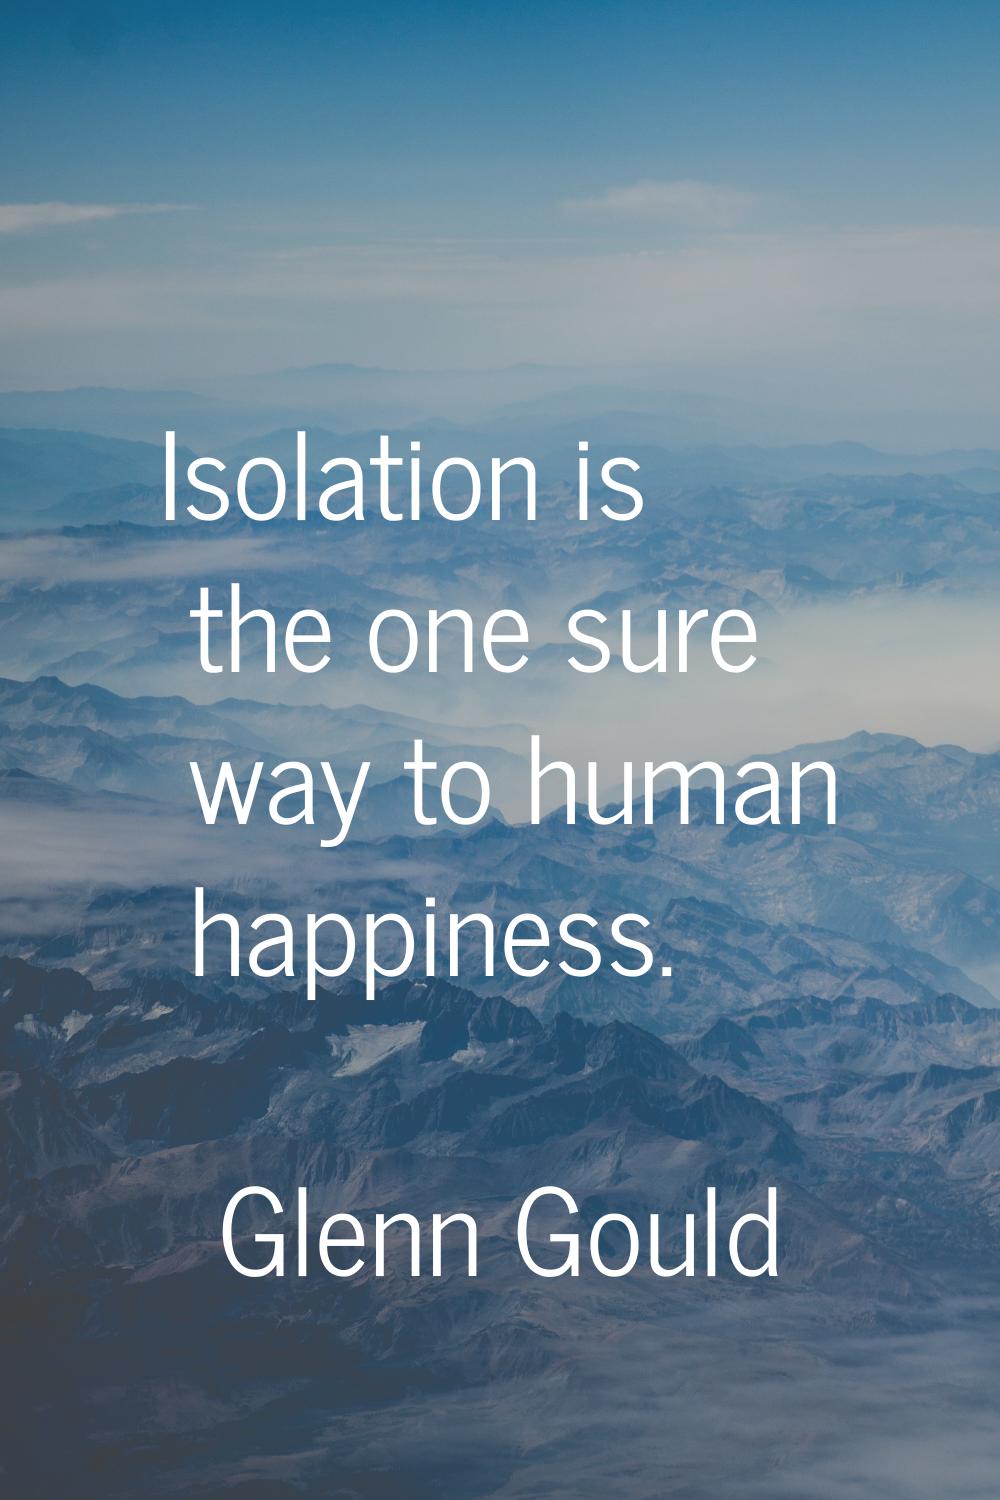 Isolation is the one sure way to human happiness.